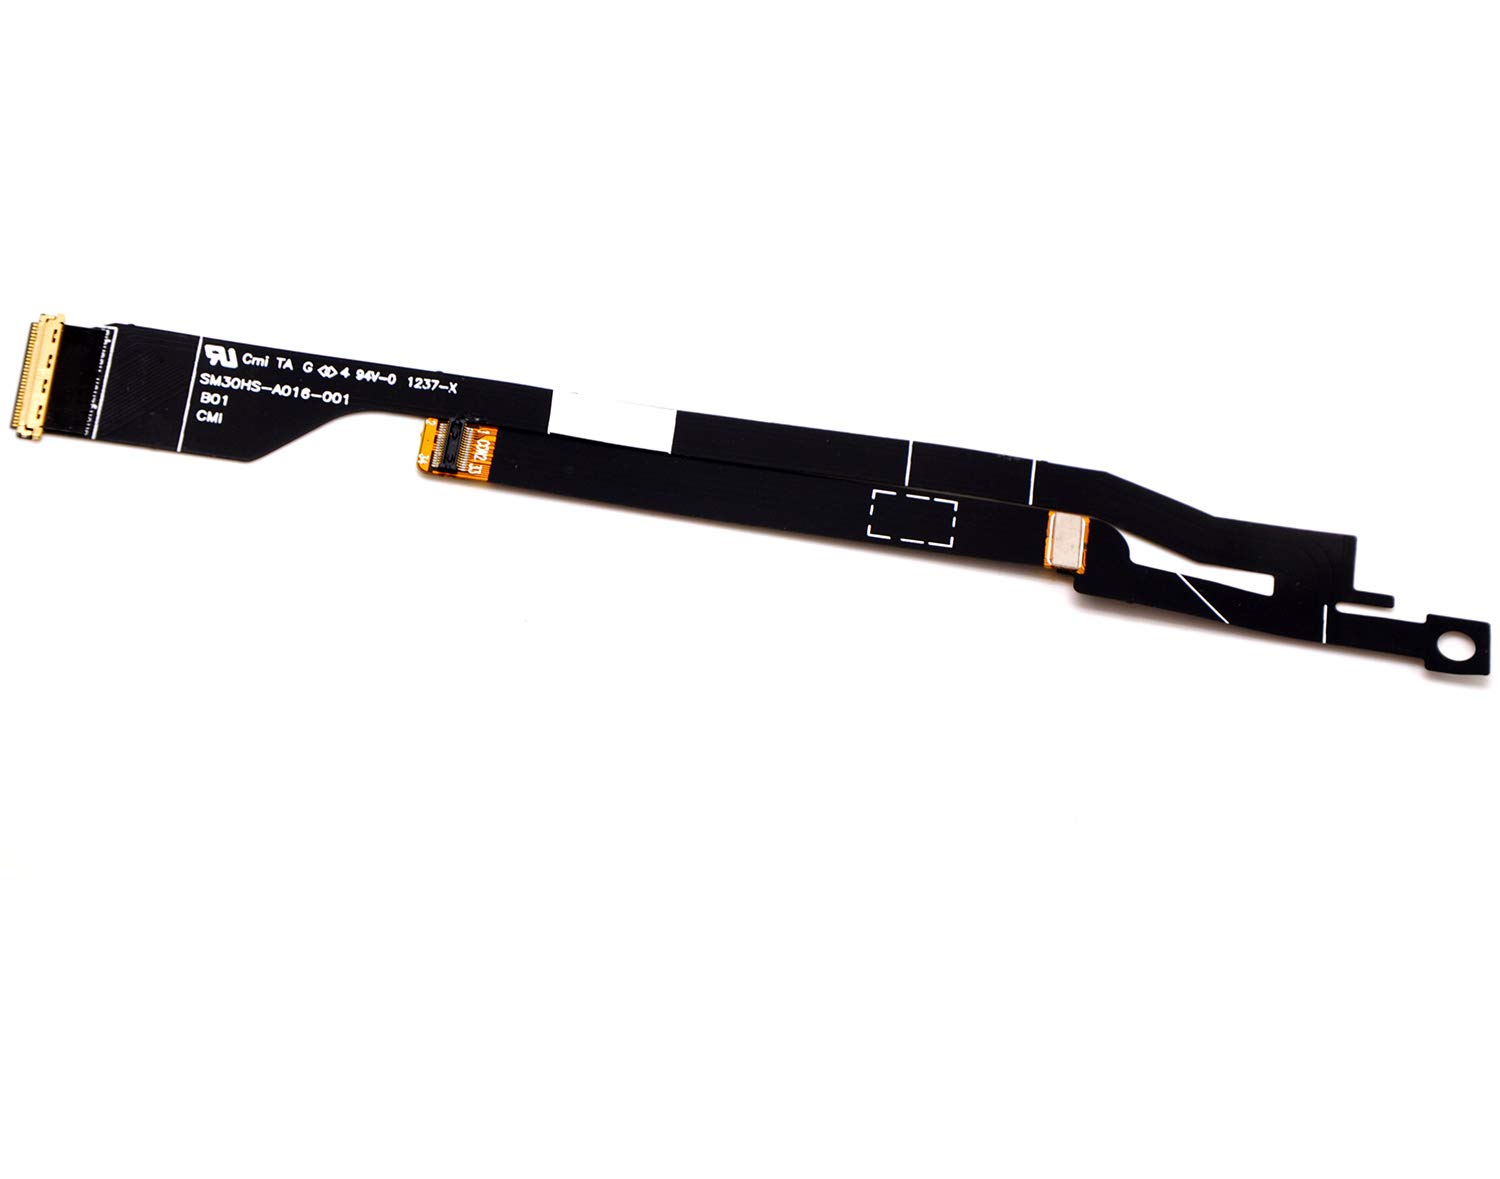 Deal4GO LCD Screen Cable Replacement Ribbon Flex Cable for Acer Ultrabook Aspire S3-951/391/371 MS2346 SM30HS-A016-001